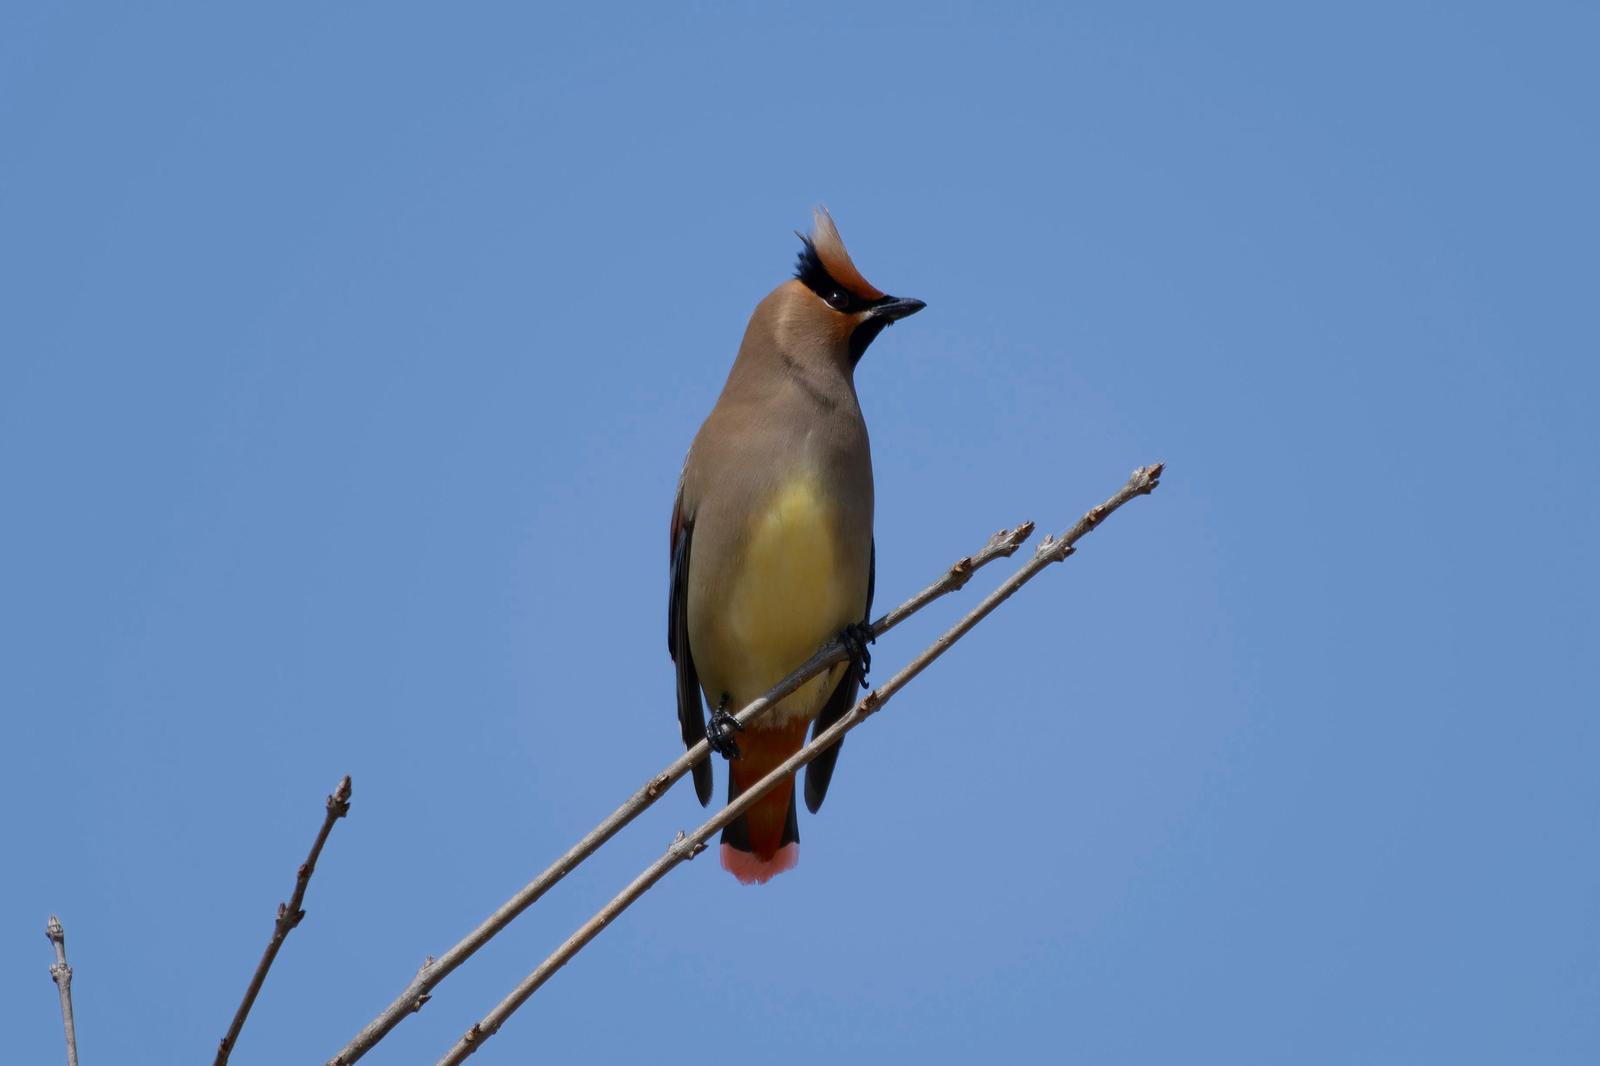 Japanese Waxwing Photo by Robert Cousins